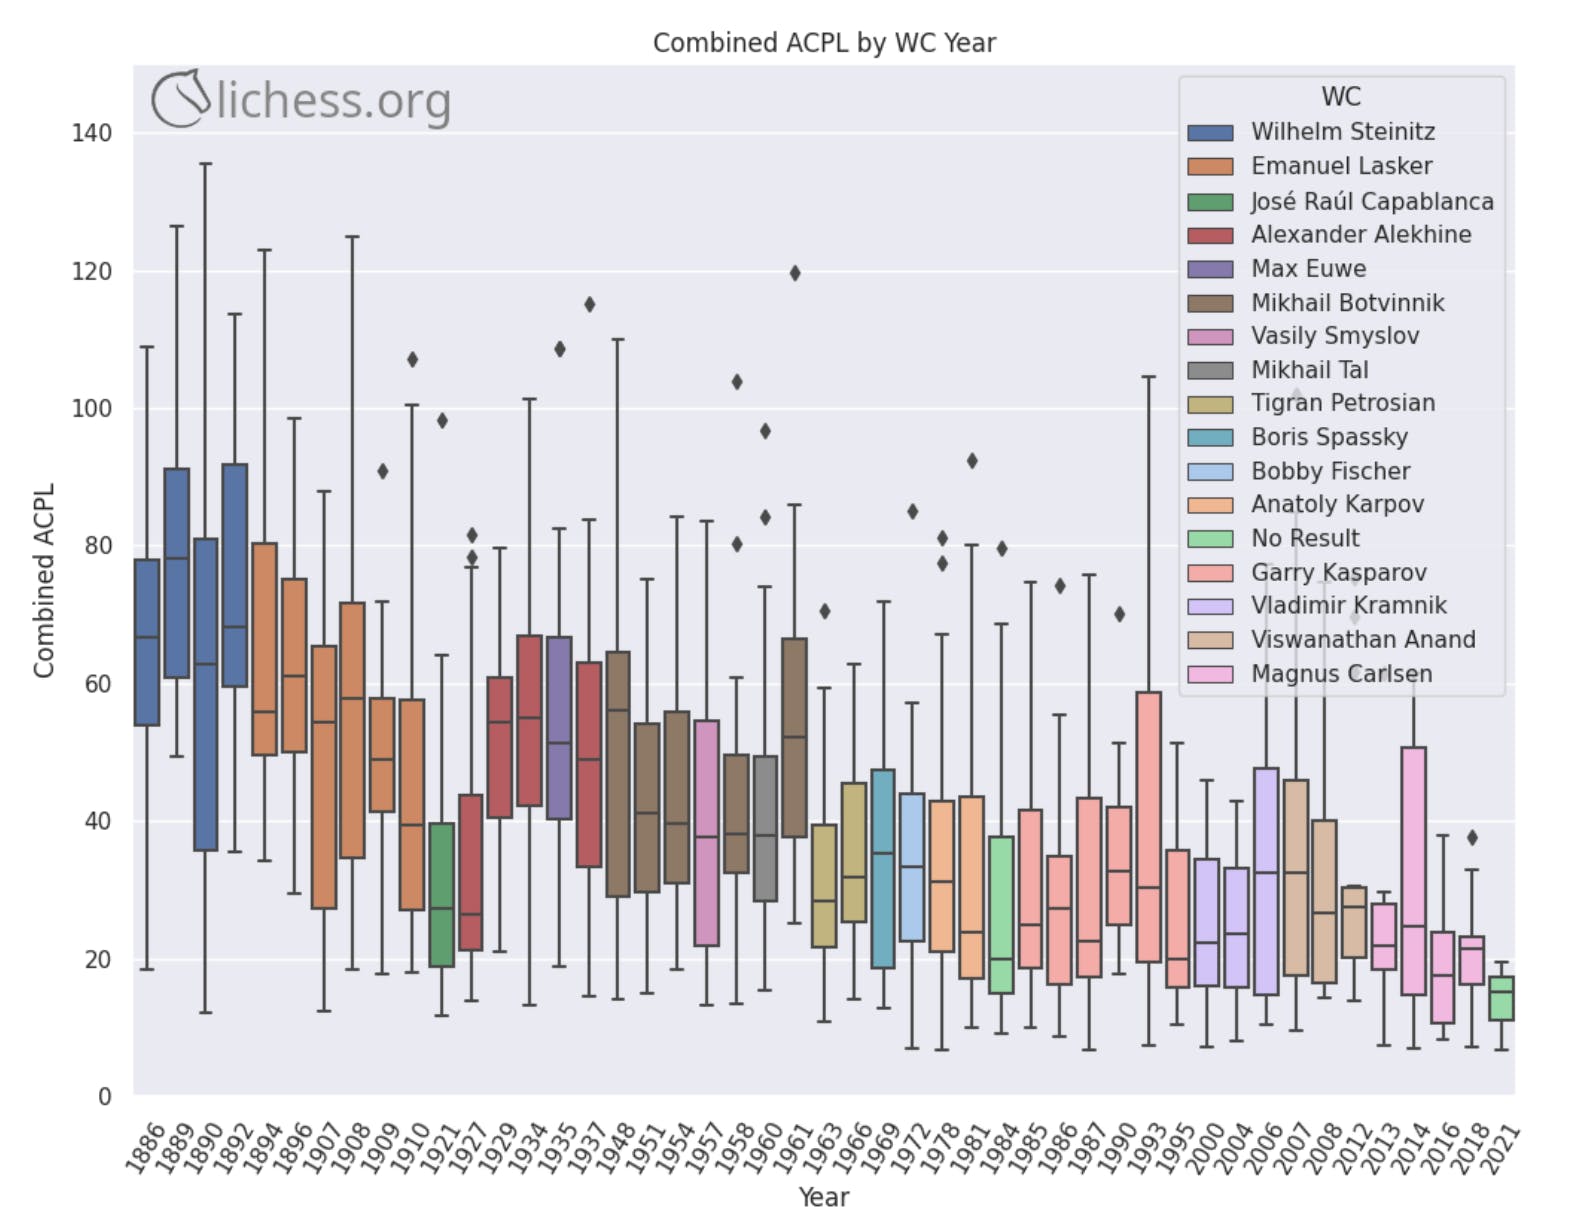 Vince Buffalo on X: Nice data analysis by @lichess on the